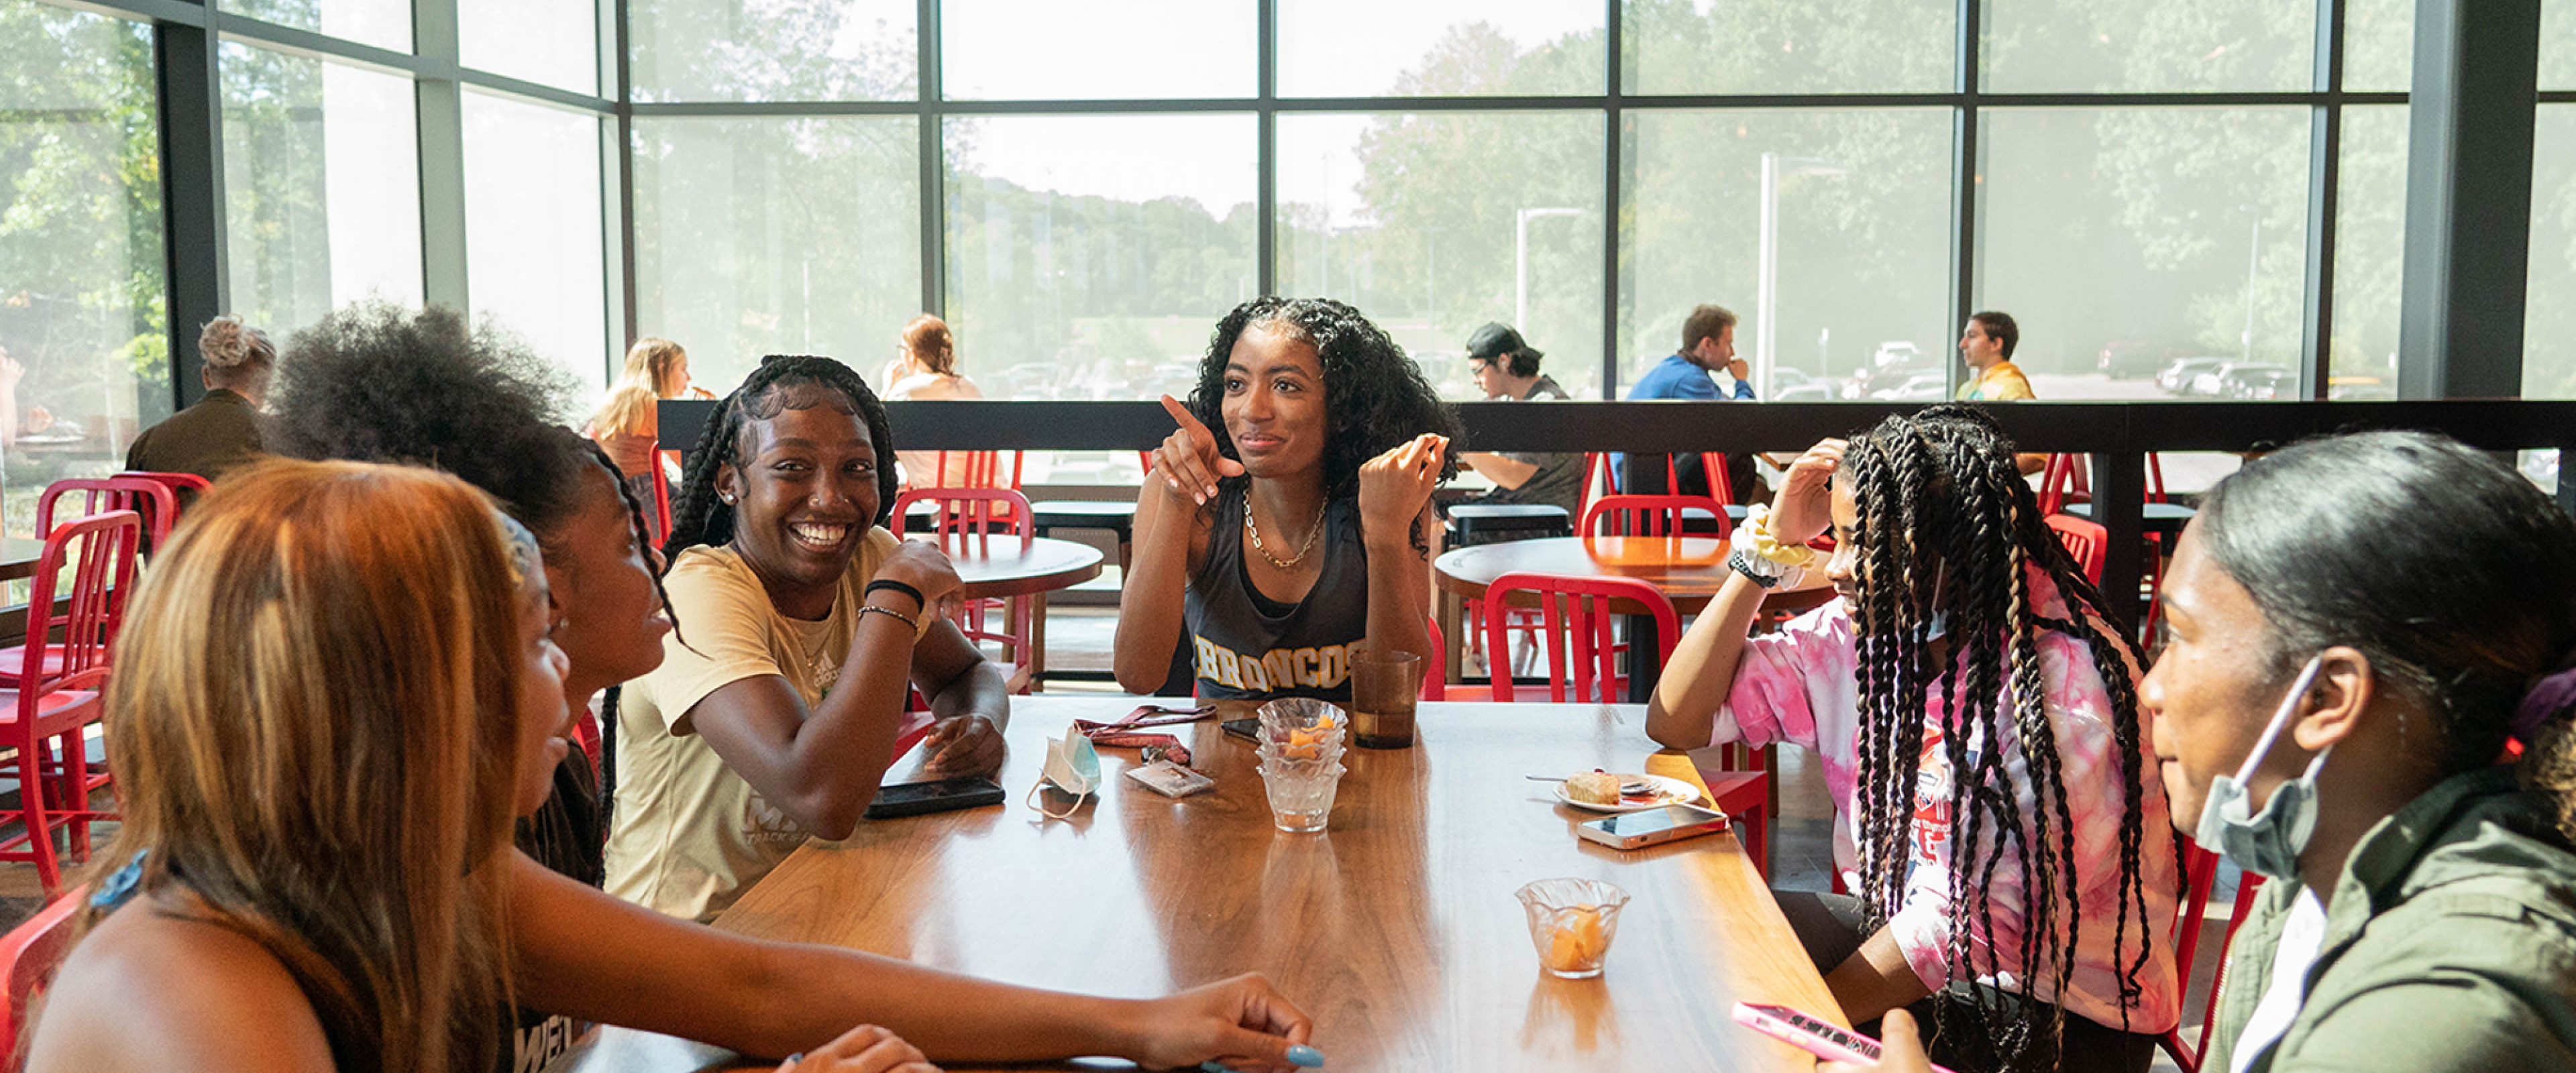 Group of students at Valley Dining Center enjoying a meal with friends.